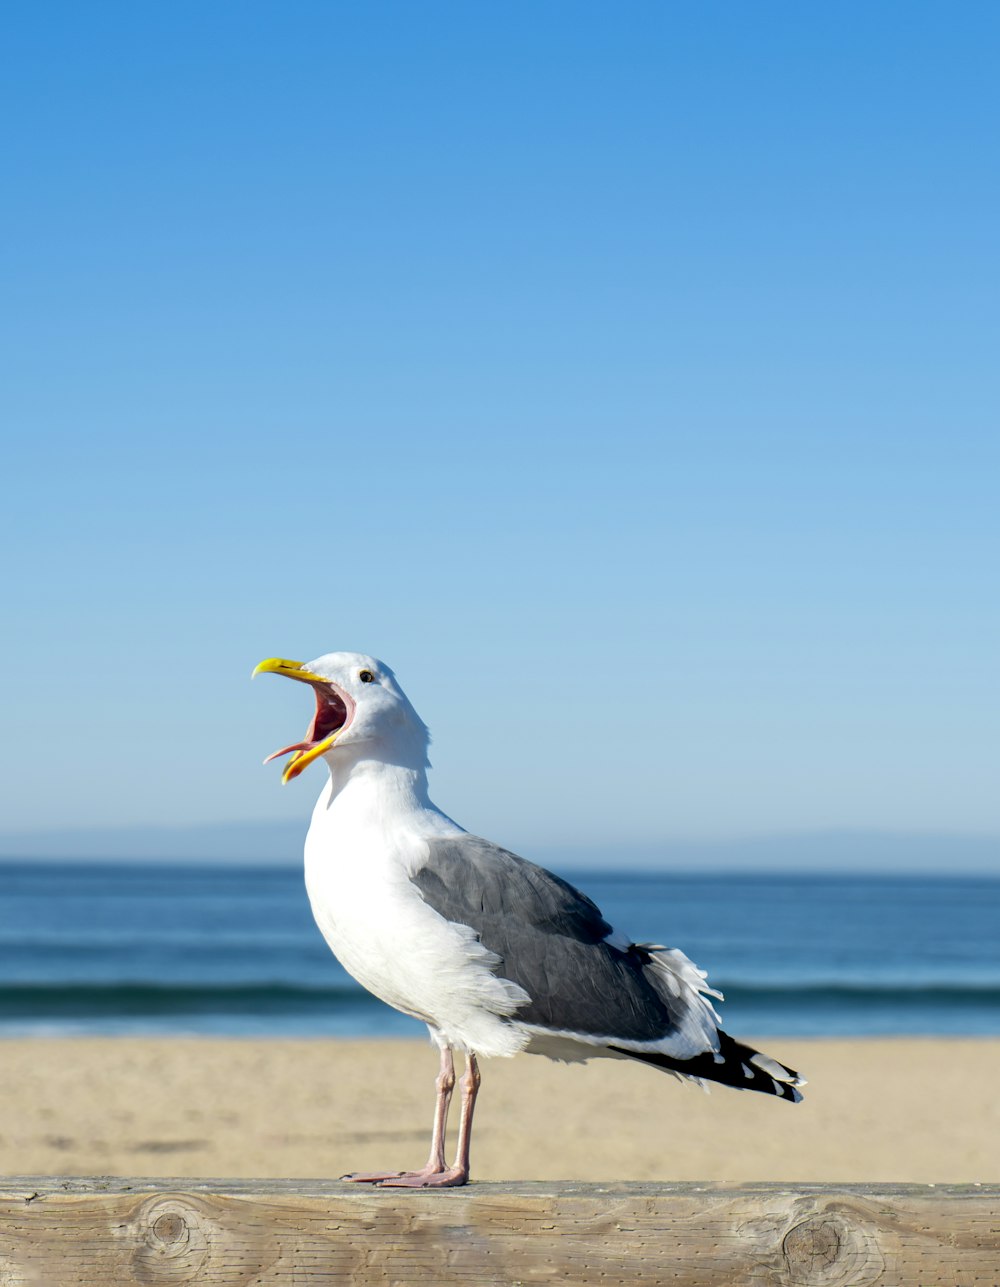 a seagull with its mouth open on the beach